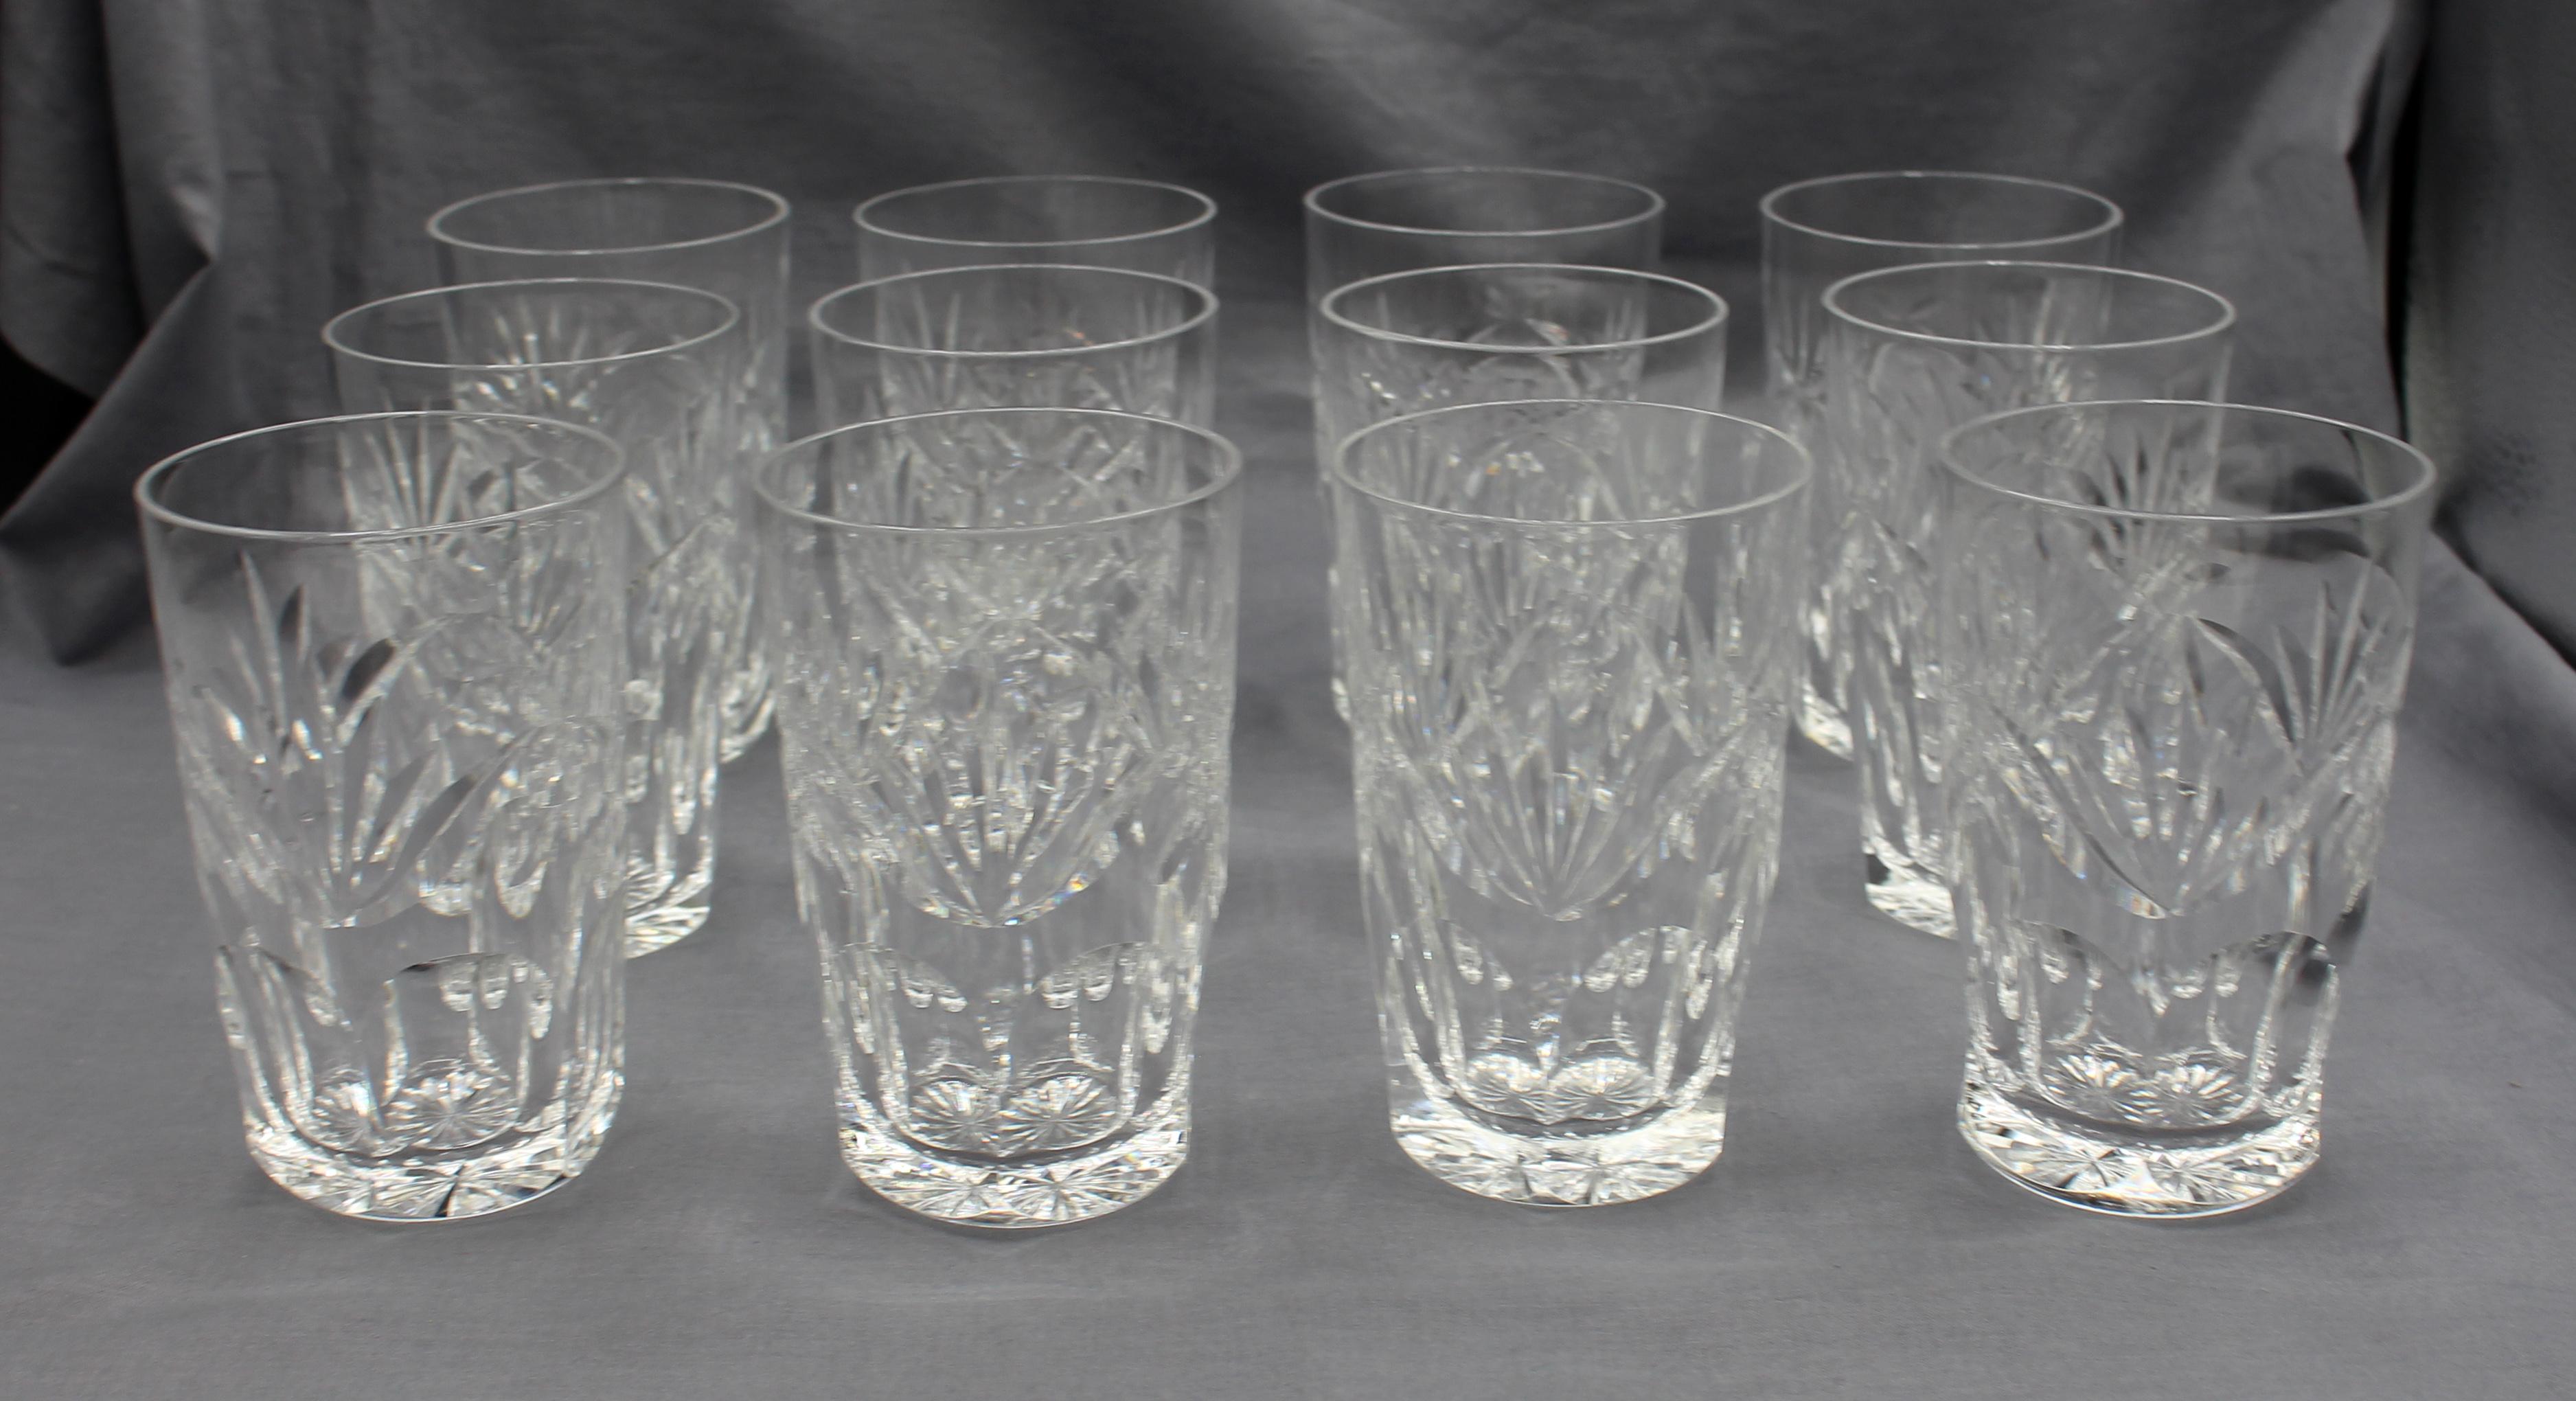 Vintage set of 12 double old-fashioned tumblers or highball glasses, Ashling by Waterford. Pattern produced 1968-2017. Double or Tall Mint Juleps in Kentucky. Hand blown & cut. Measures: 4 5/8